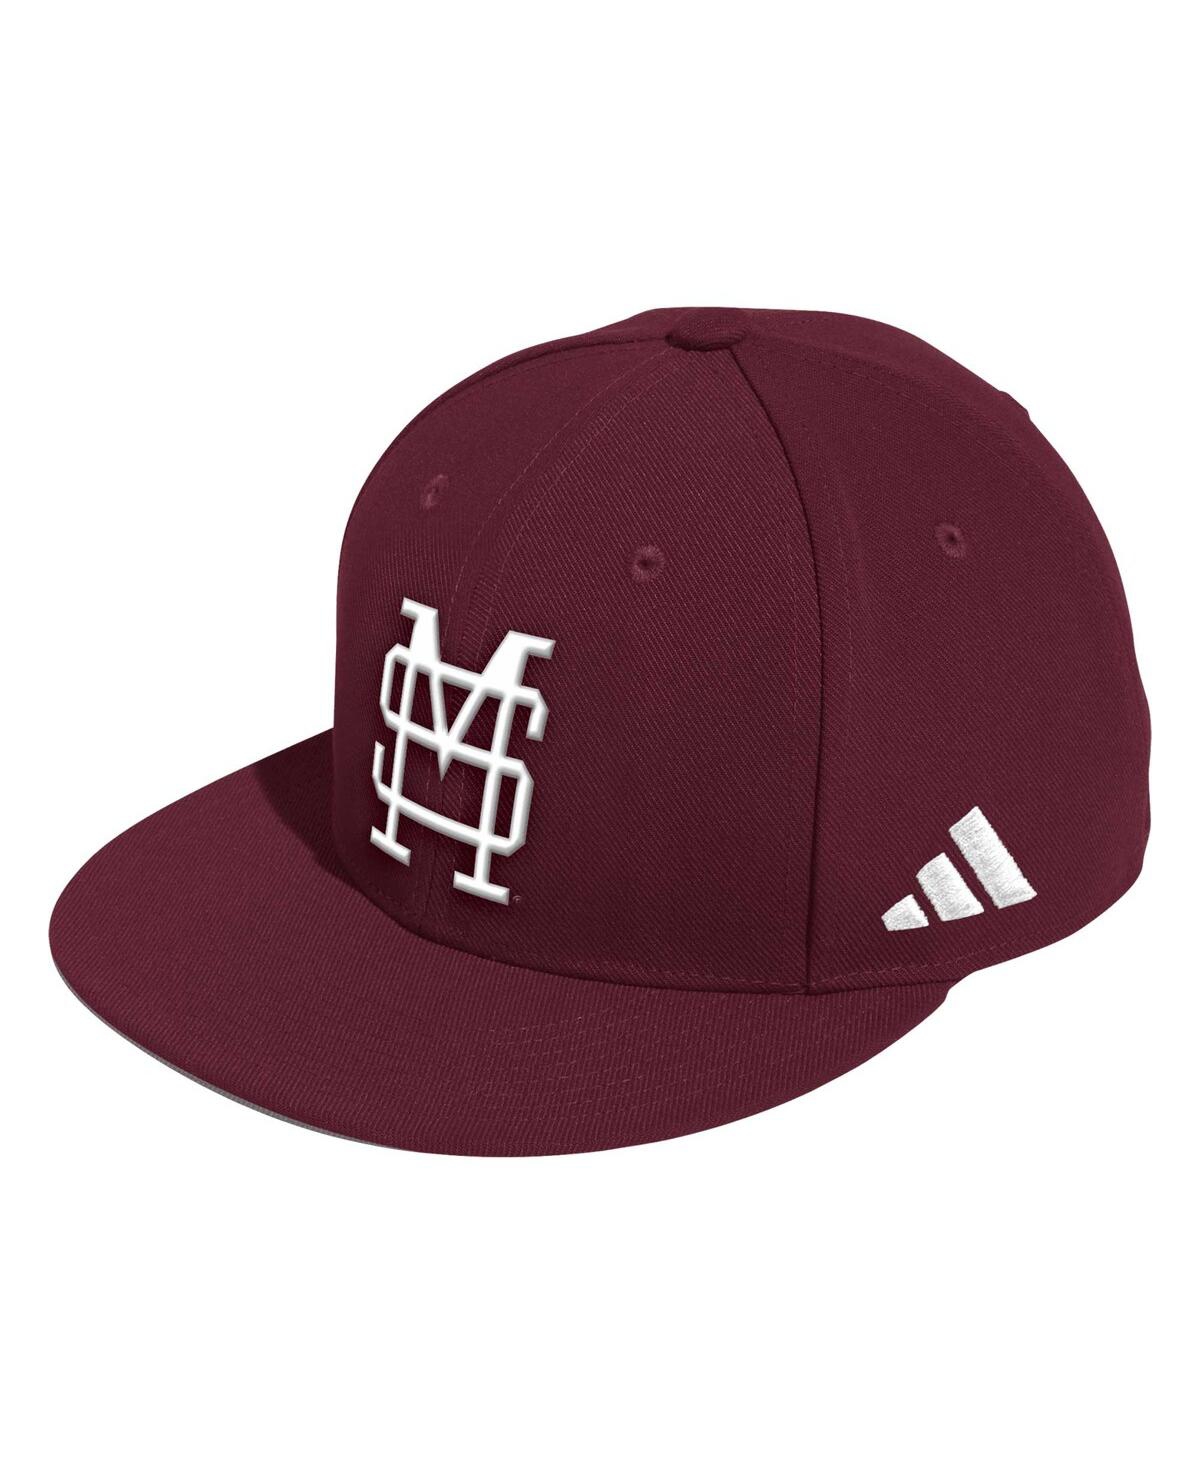 Adidas Originals Men's Adidas Maroon Mississippi State Bulldogs On-field Baseball Fitted Hat